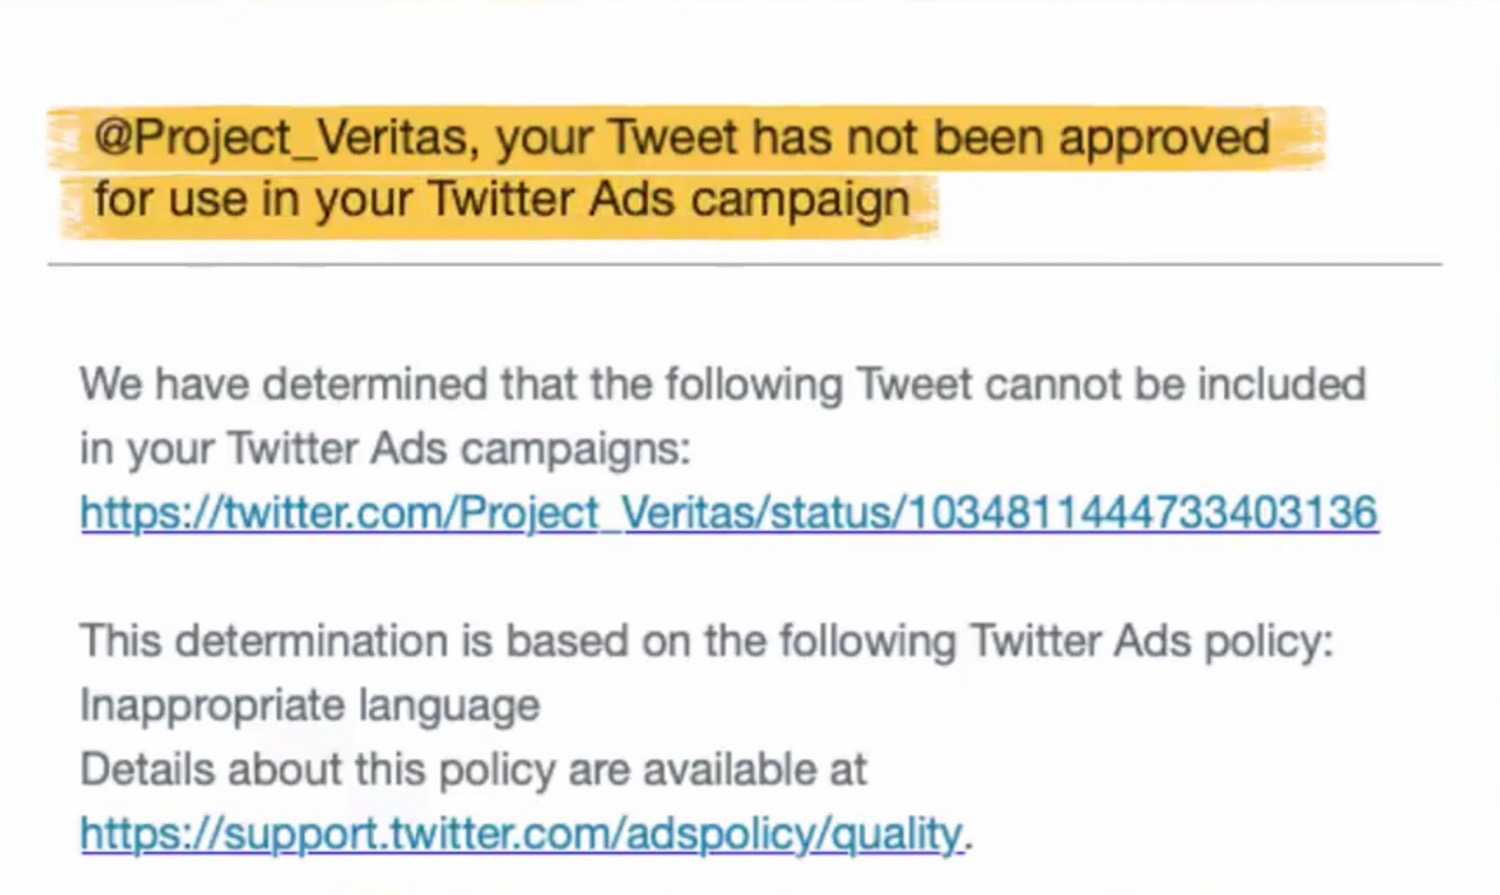 The message from Twitter saying a tweet from Project Veritas has not been approved for use in its ad campaign.